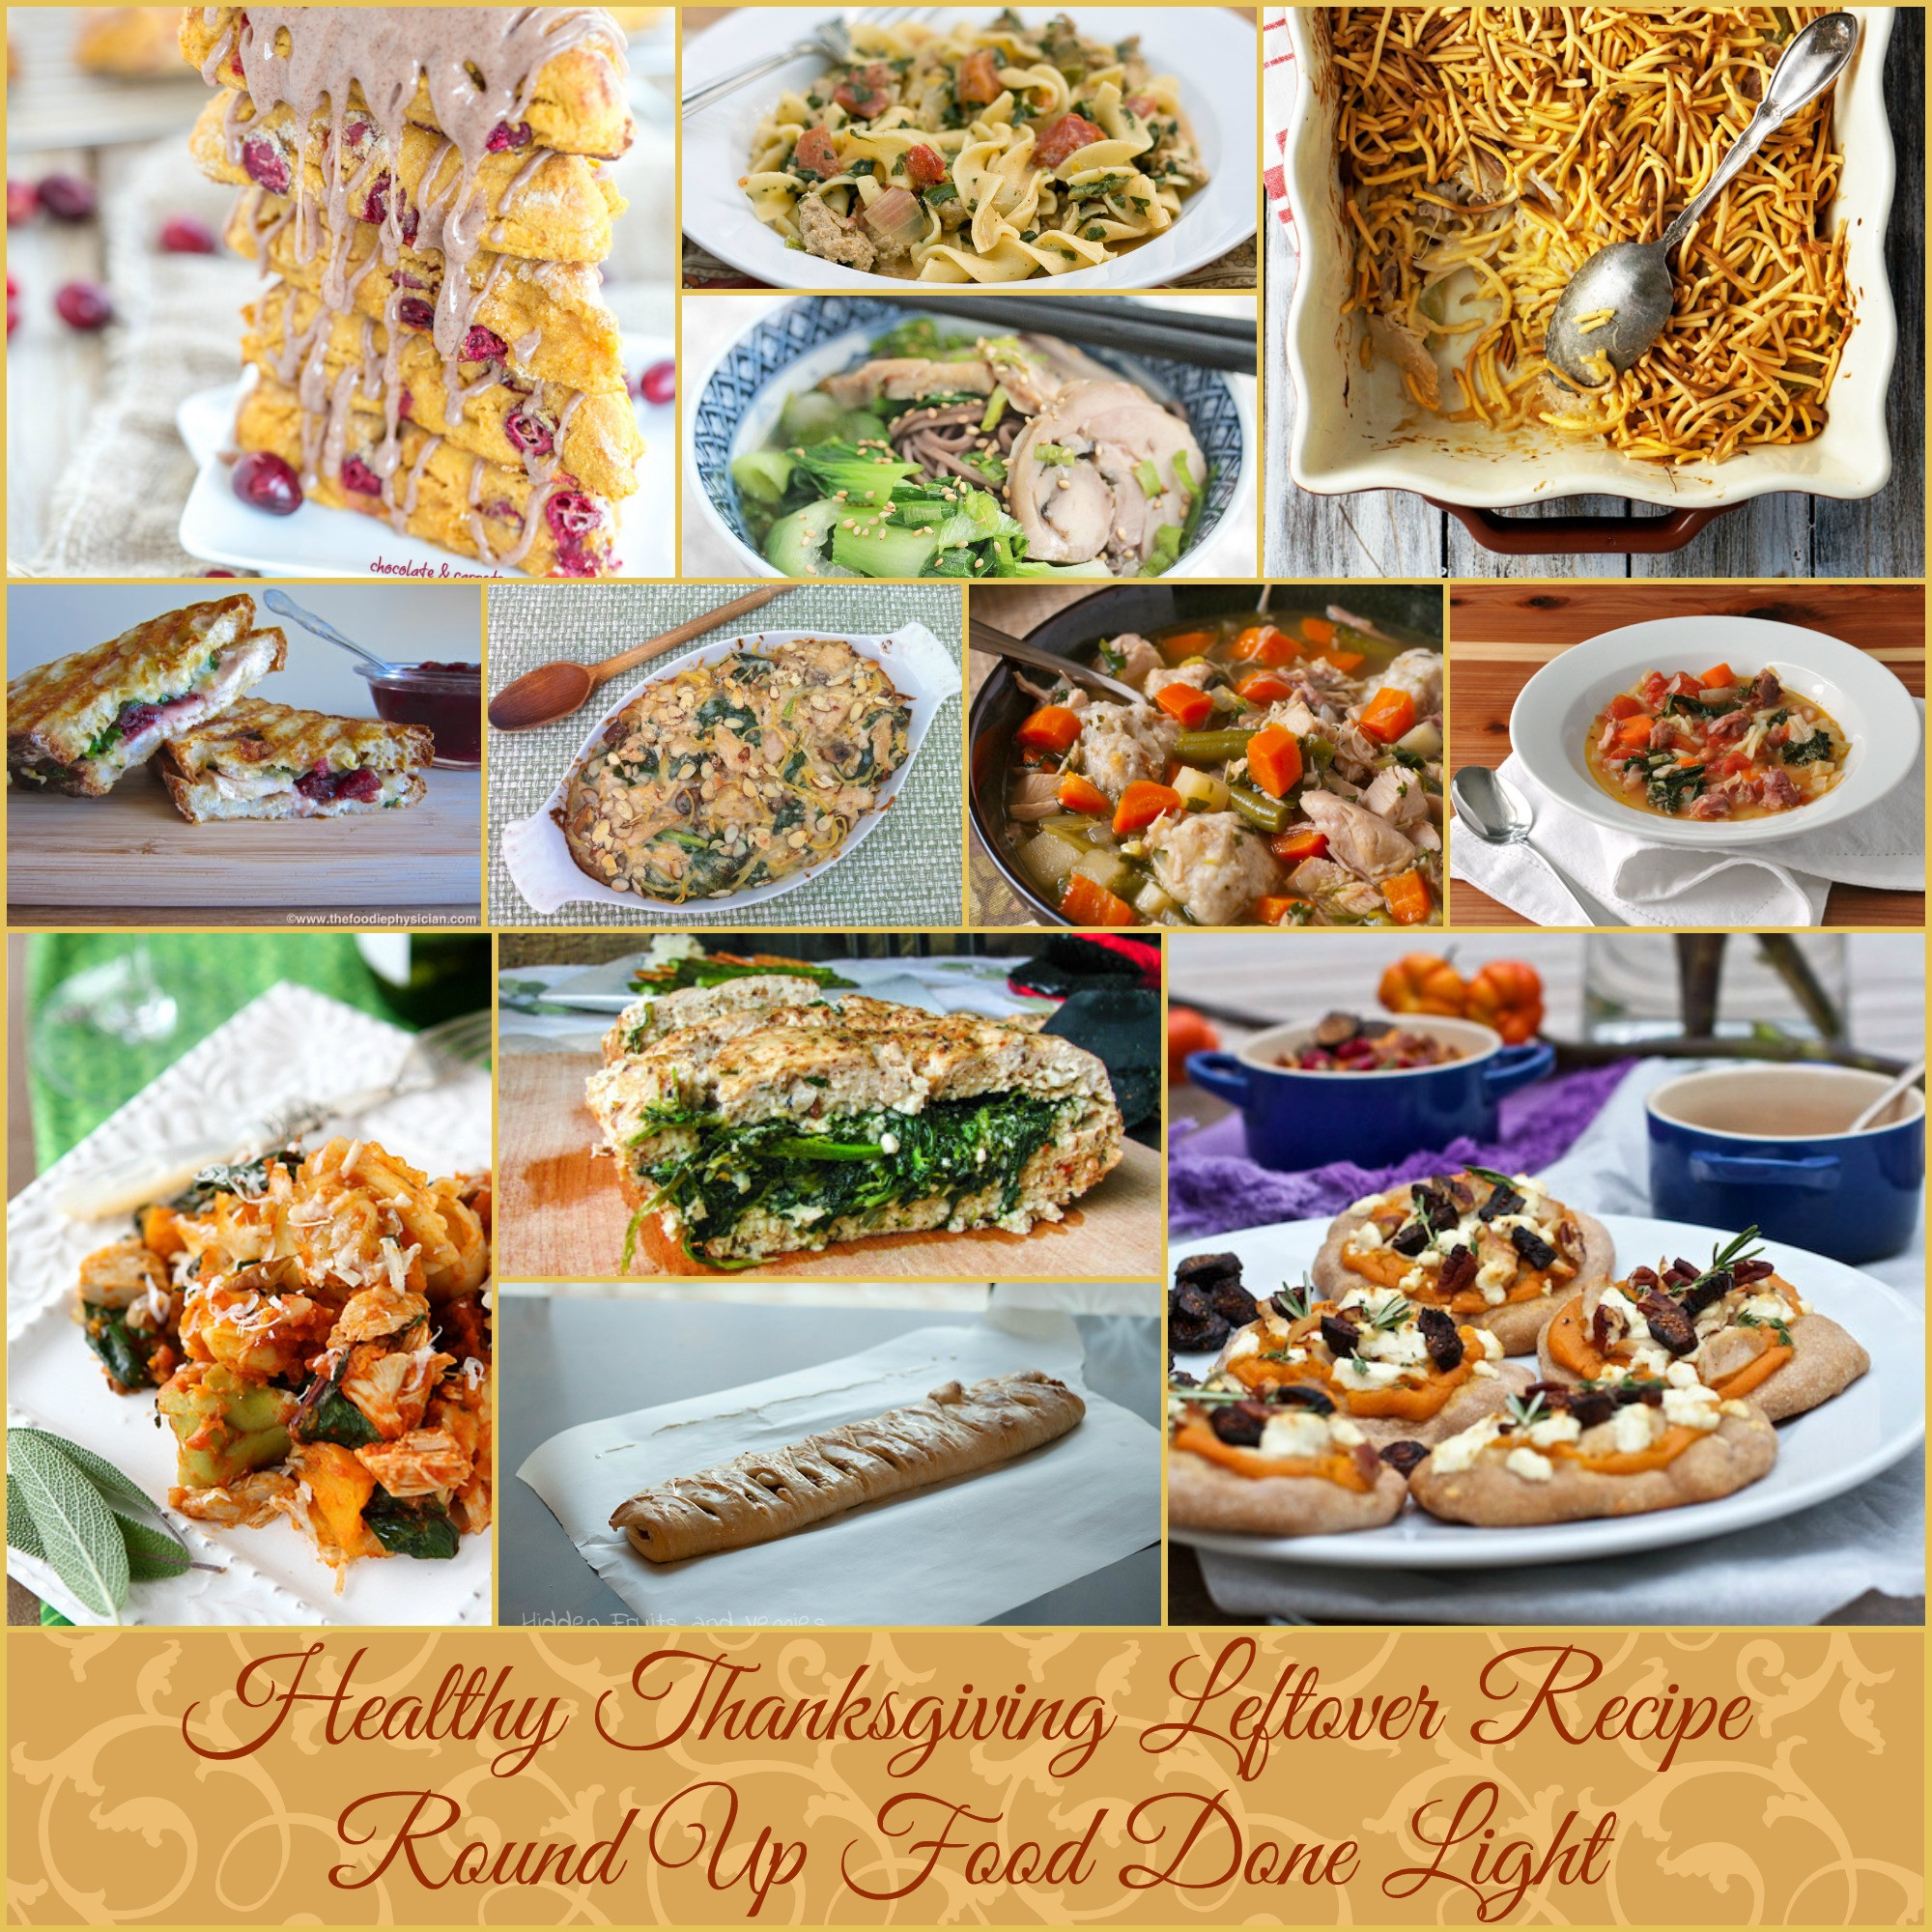 Healthy Thanksgiving Meals
 Healthy Thanksgiving Leftover Recipe Round Up